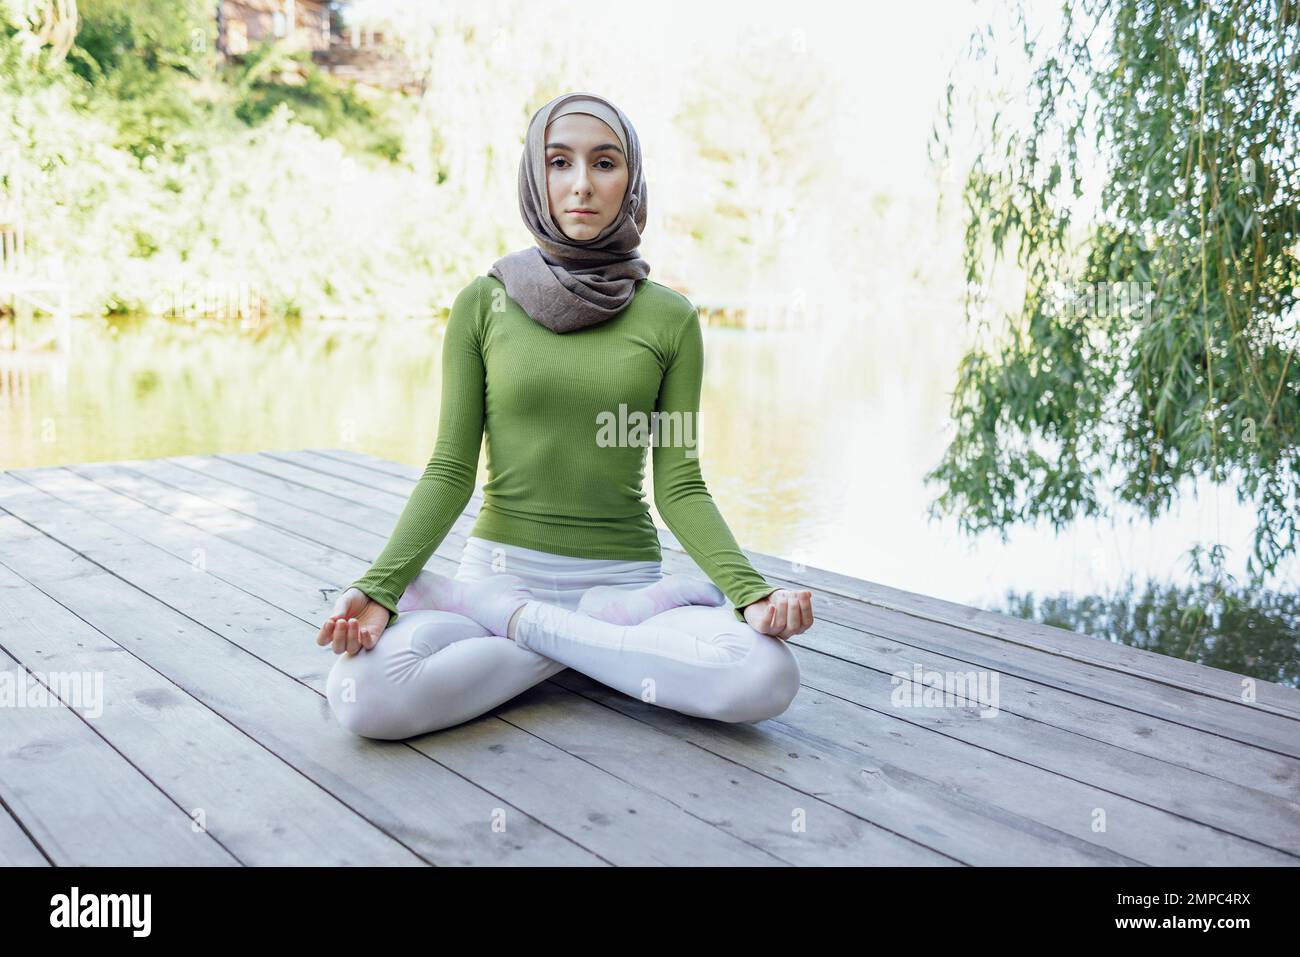 Muslim young girl in a hijab is doing yoga asana in the park. Teenage girl sits in a lotus position on pier by the lake or river. Relax concept Stock Photo